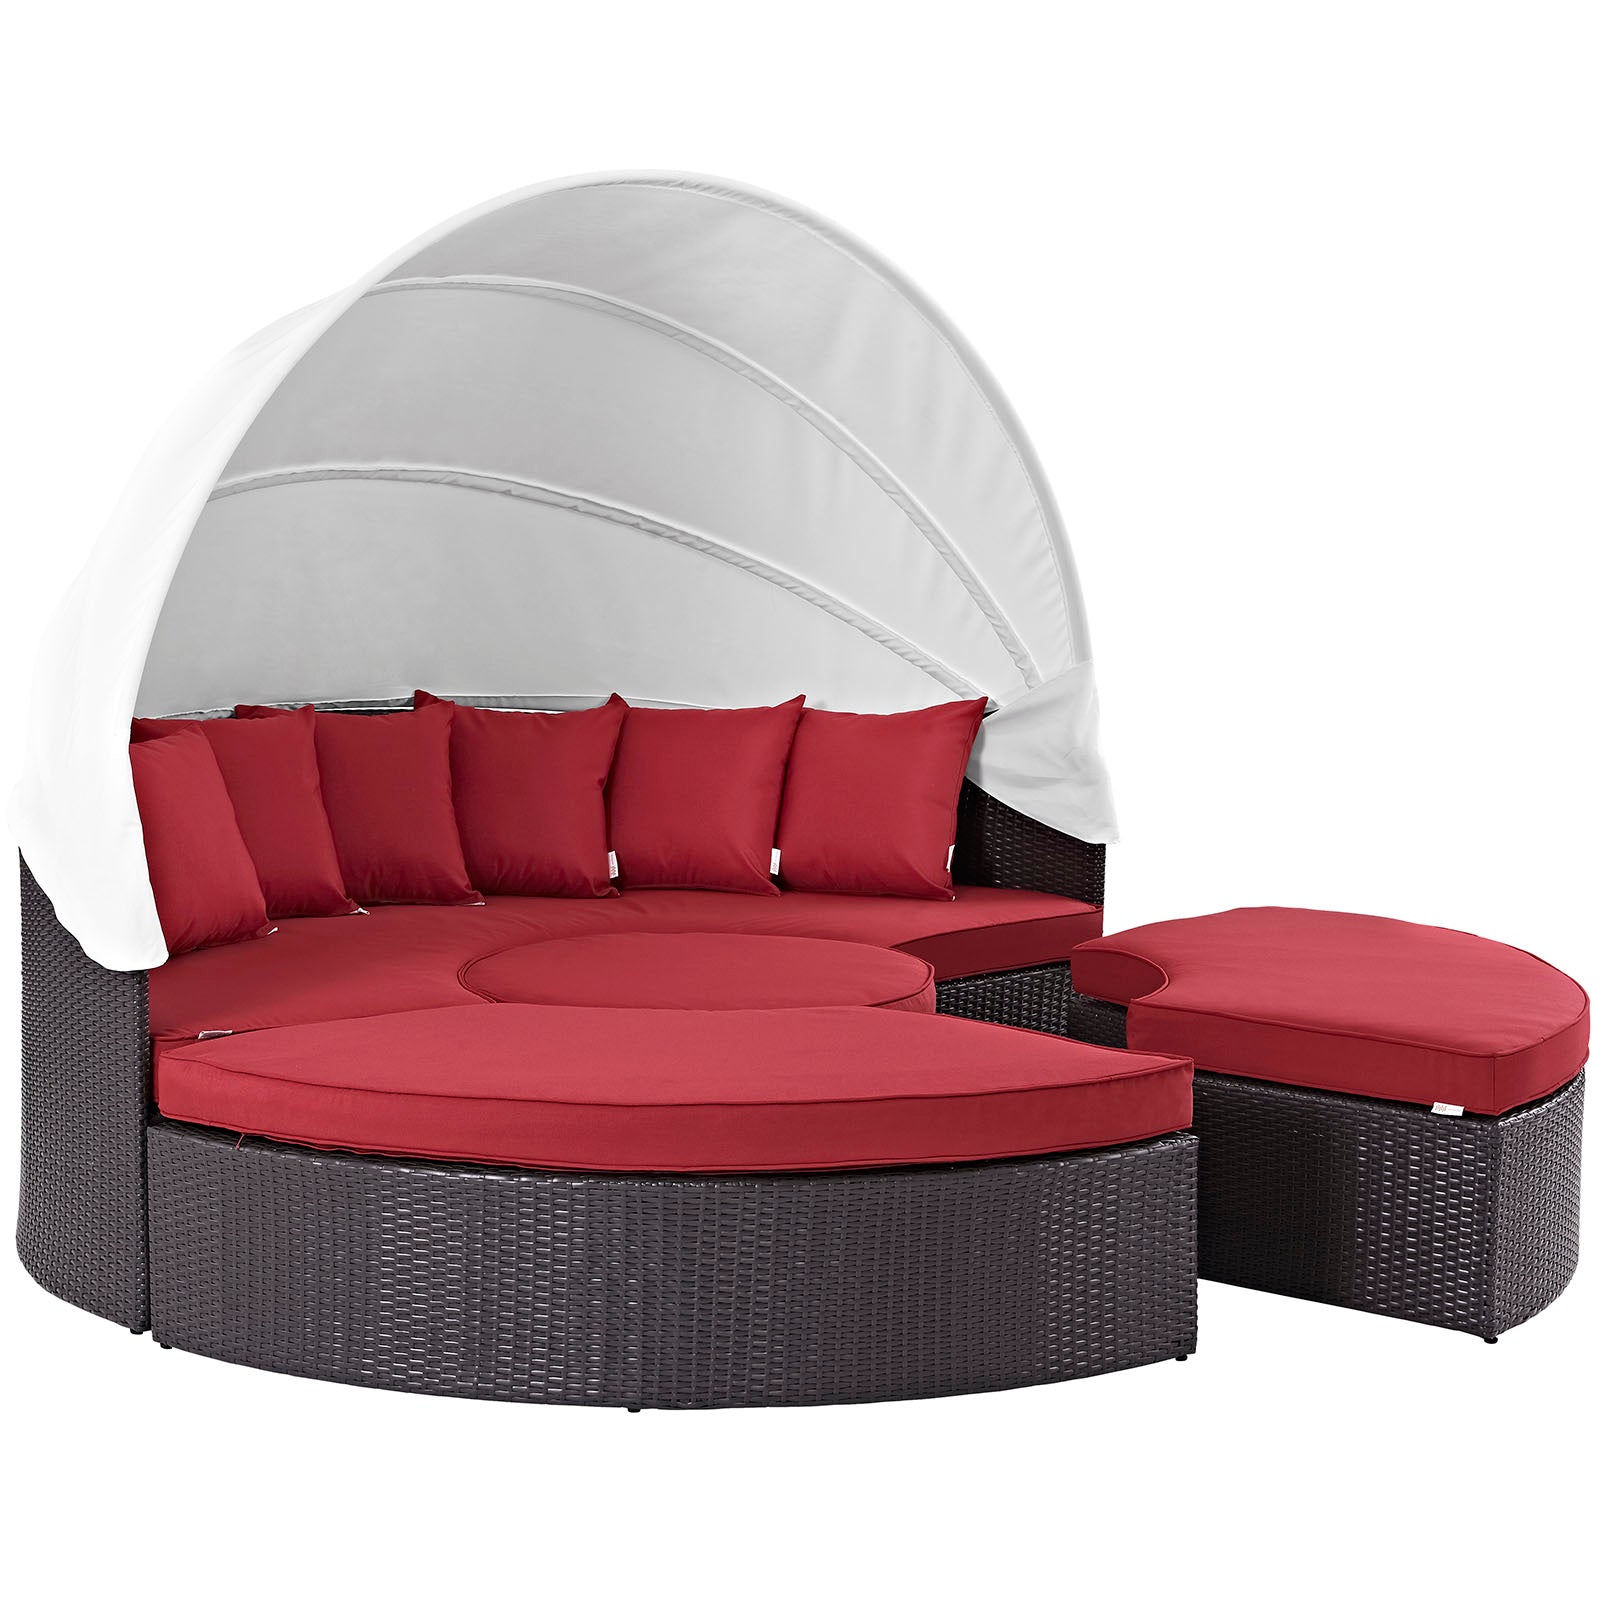 Modway Patio Daybeds - Convene Canopy Outdoor Patio 86.5"W Daybed Espresso Red